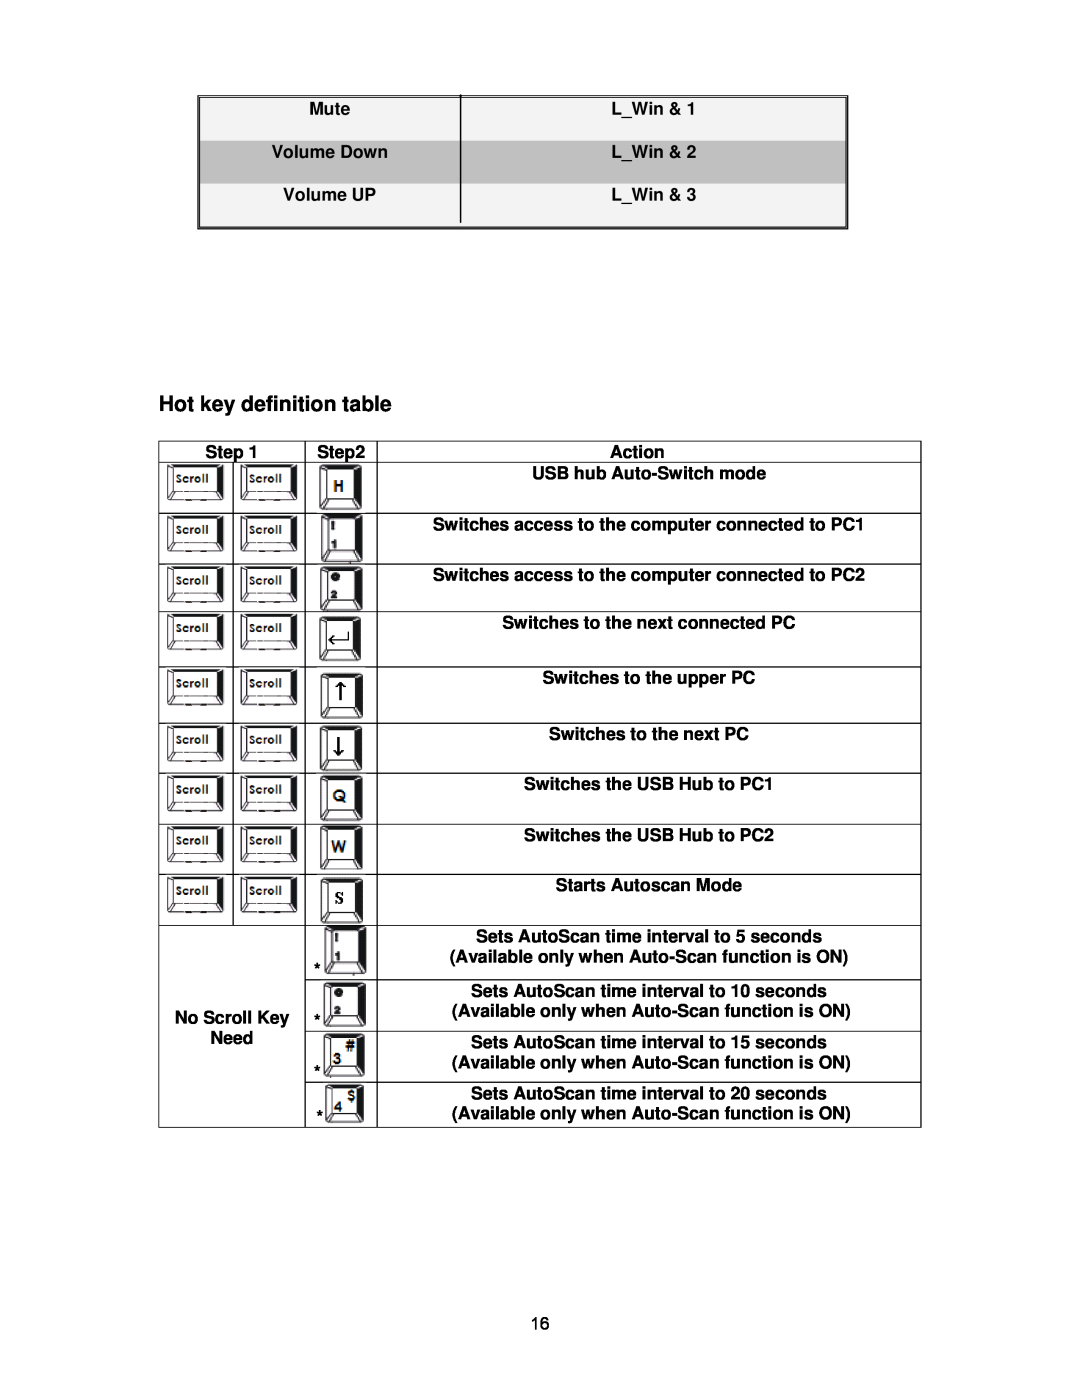 Cables to Go 35554 operation manual Hot key definition table 